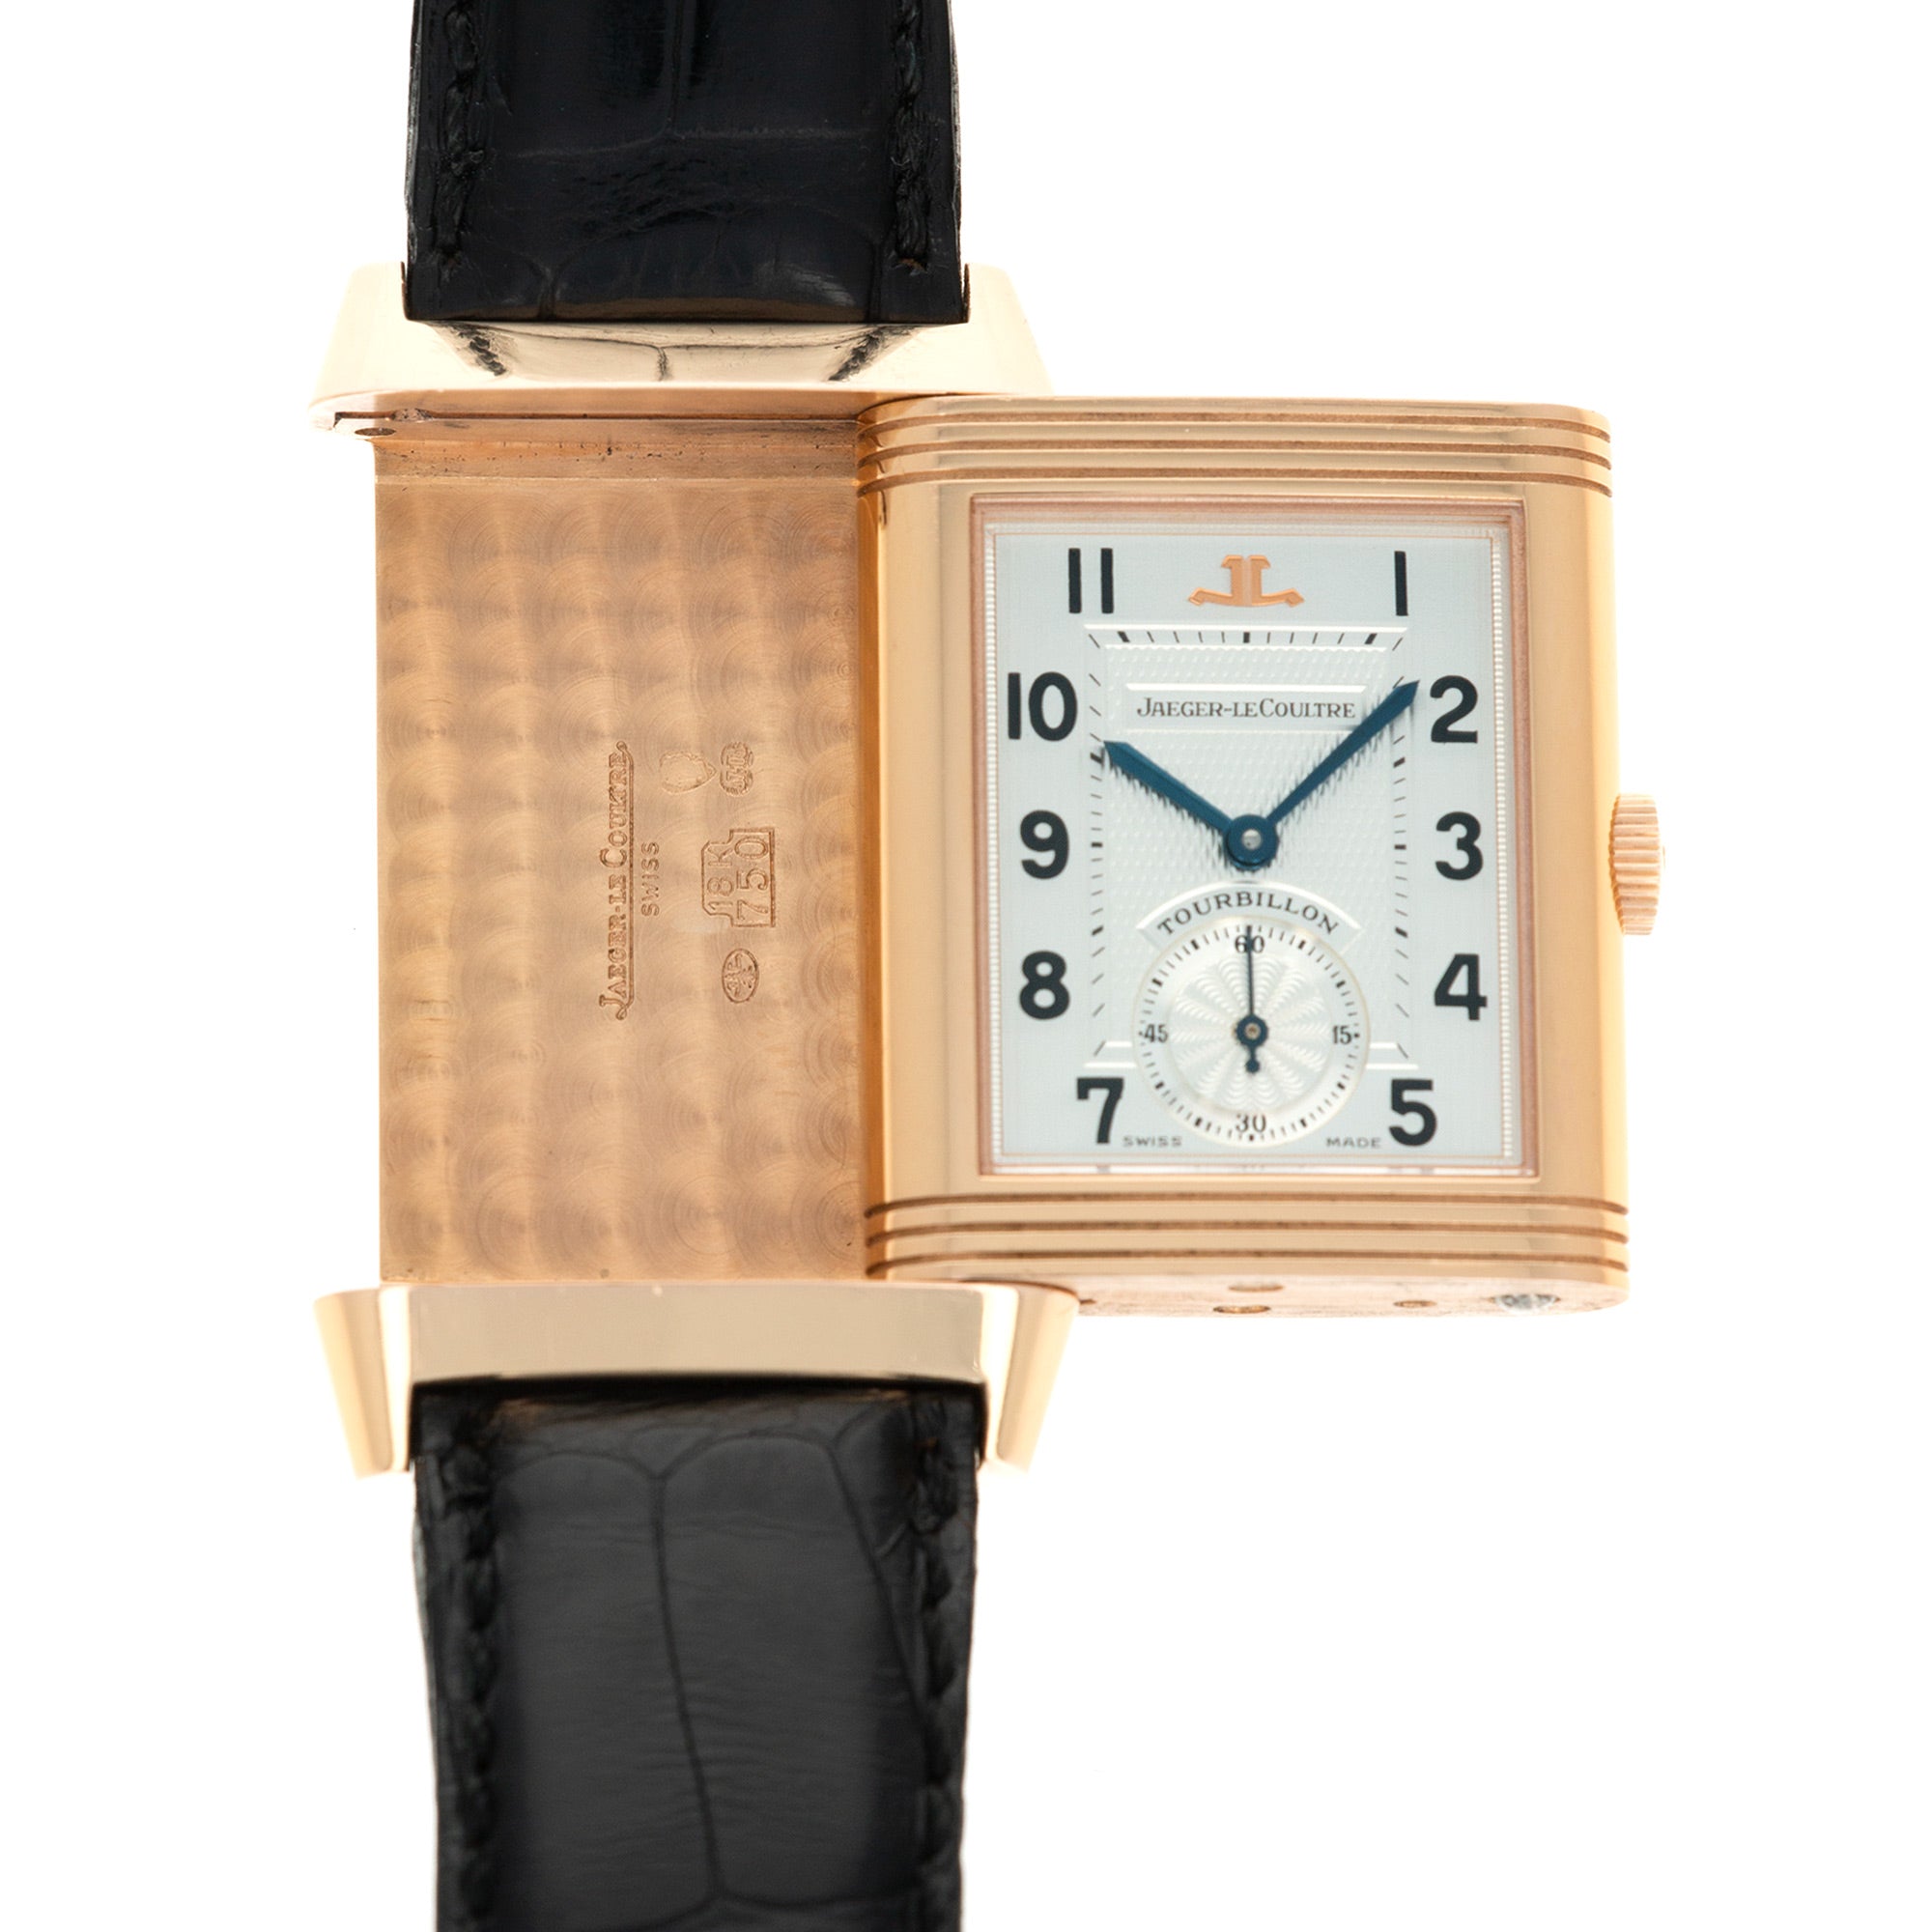 Jaeger LeCoultre - Jaeger Lecoultre Rose Gold Reverso Tourbillon Watch, Ref. 270.2.68 - The Keystone Watches